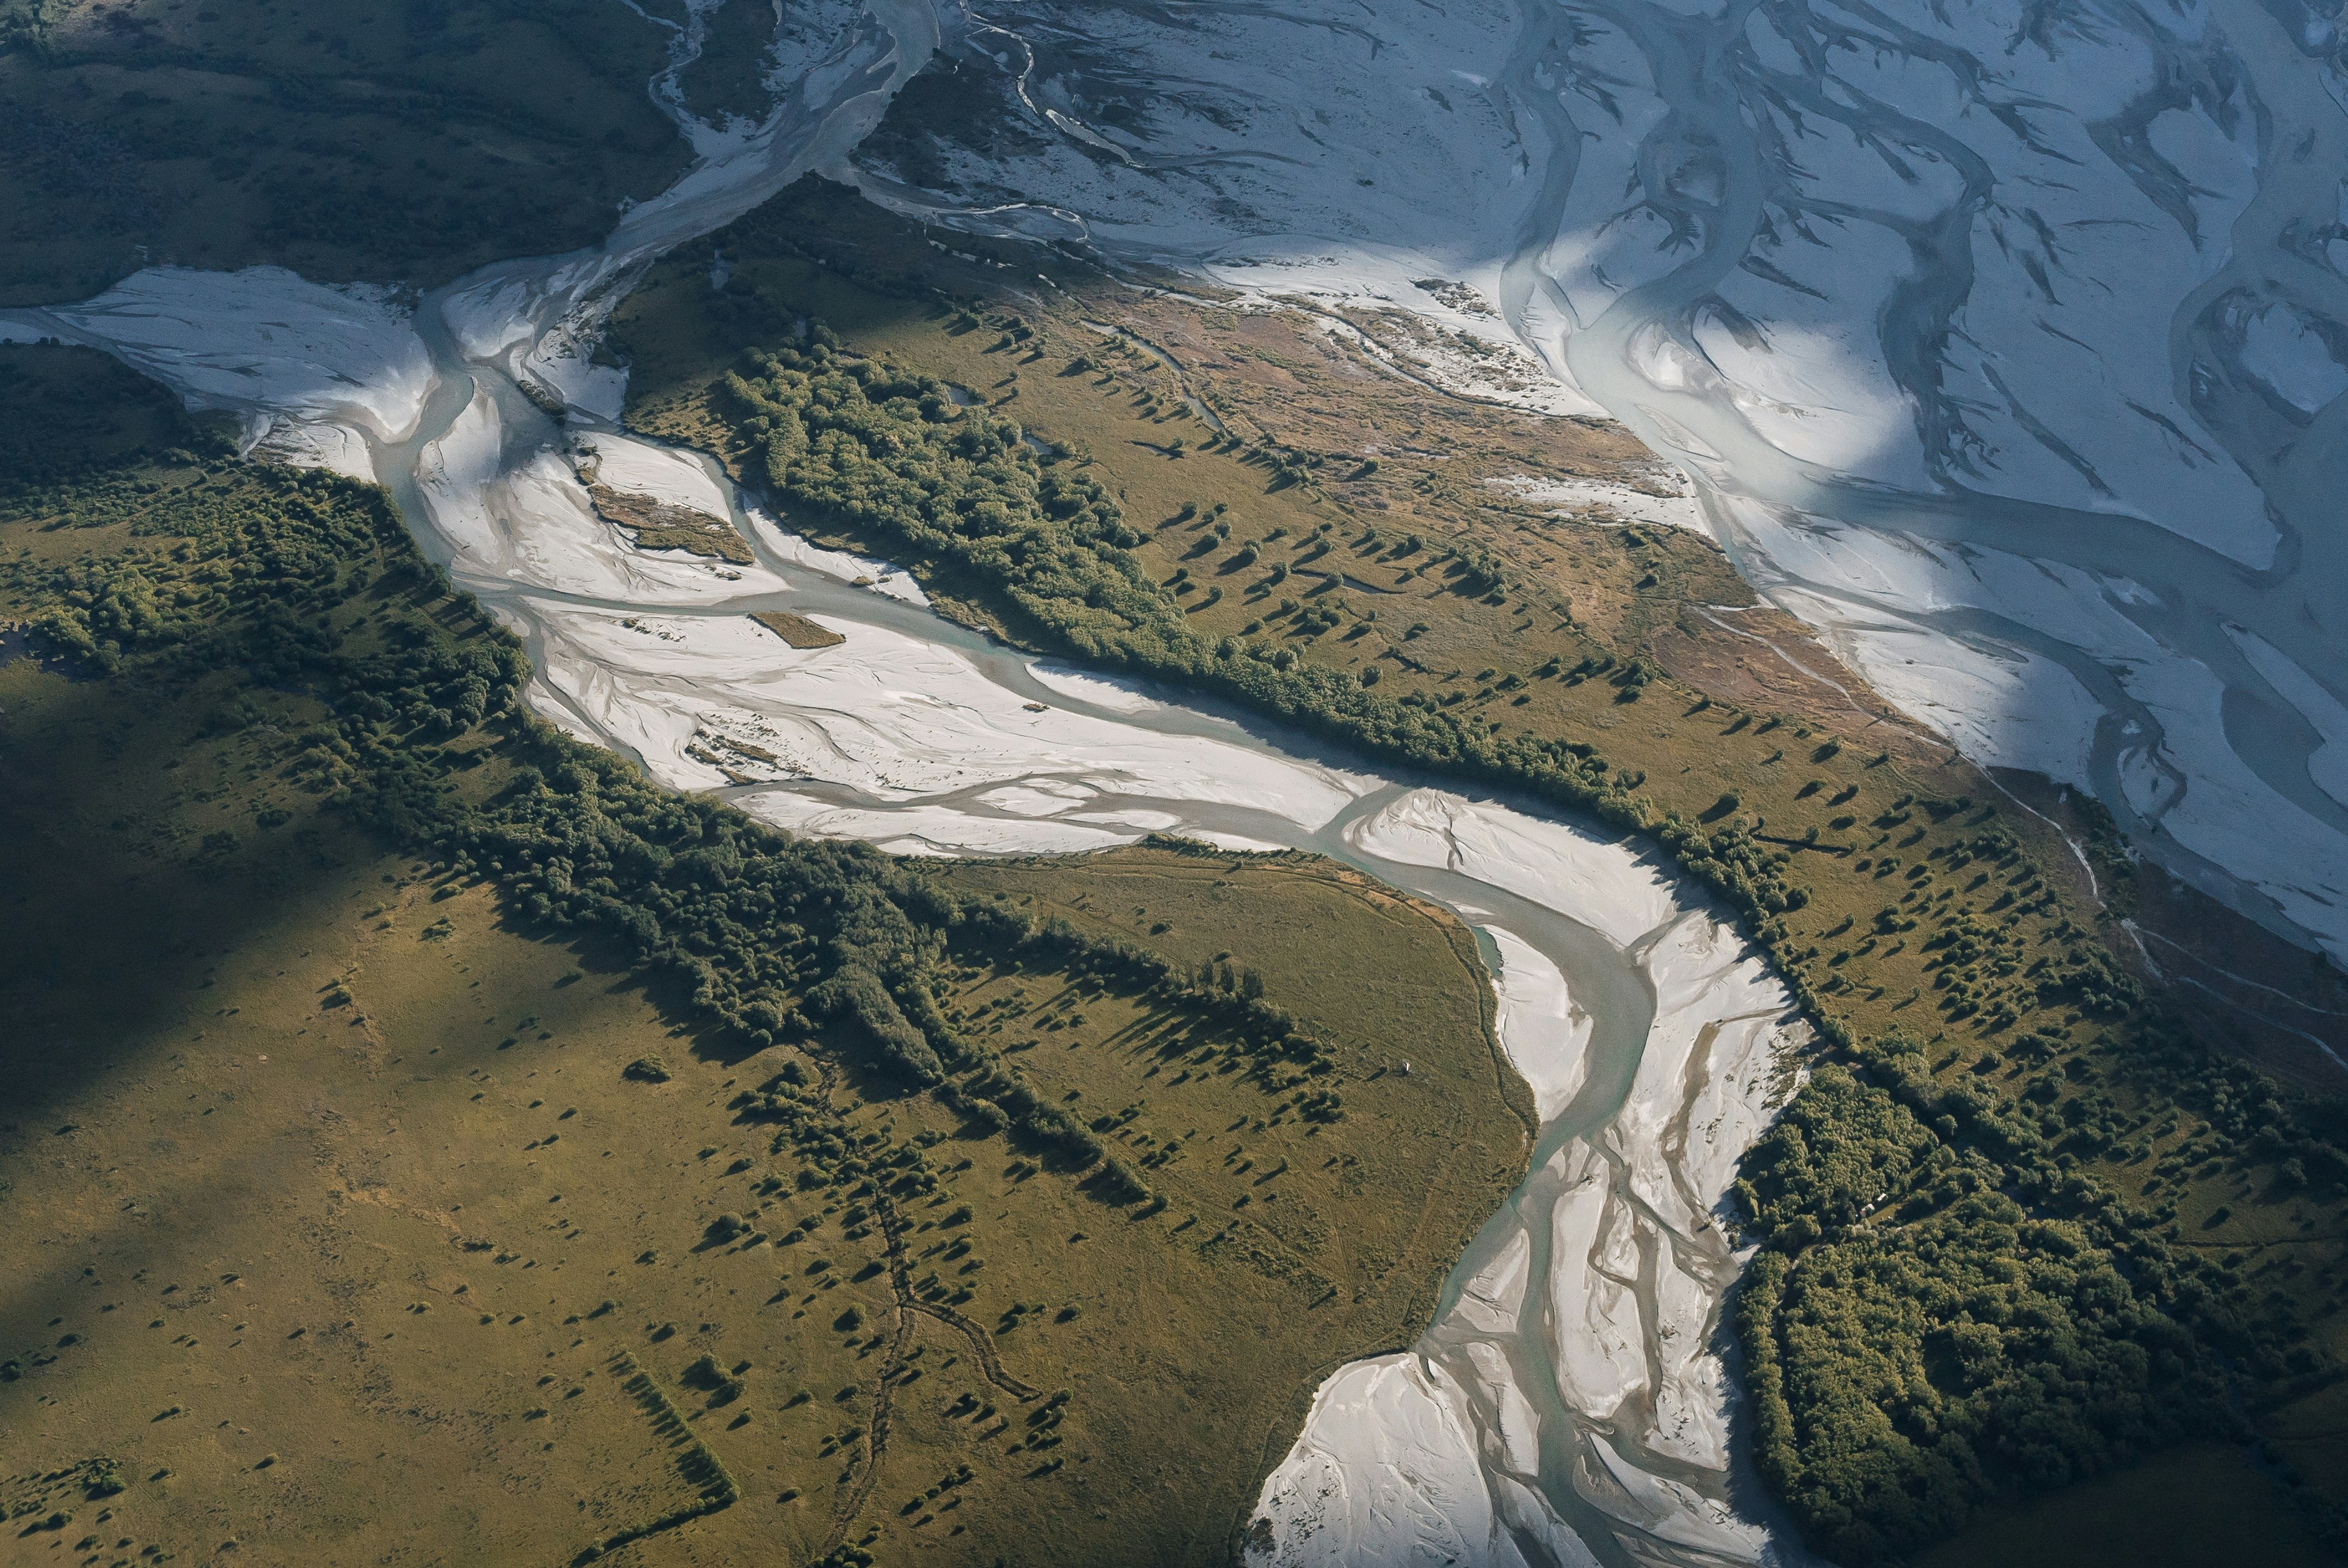 I shot this from a plane on a scenic flight through Fiordland National Park in New Zealand. It was so amazing to see the patterns of the river from above, observing how it carved its path into the landscape, before feeding Lake Wakatipu at its mouth.